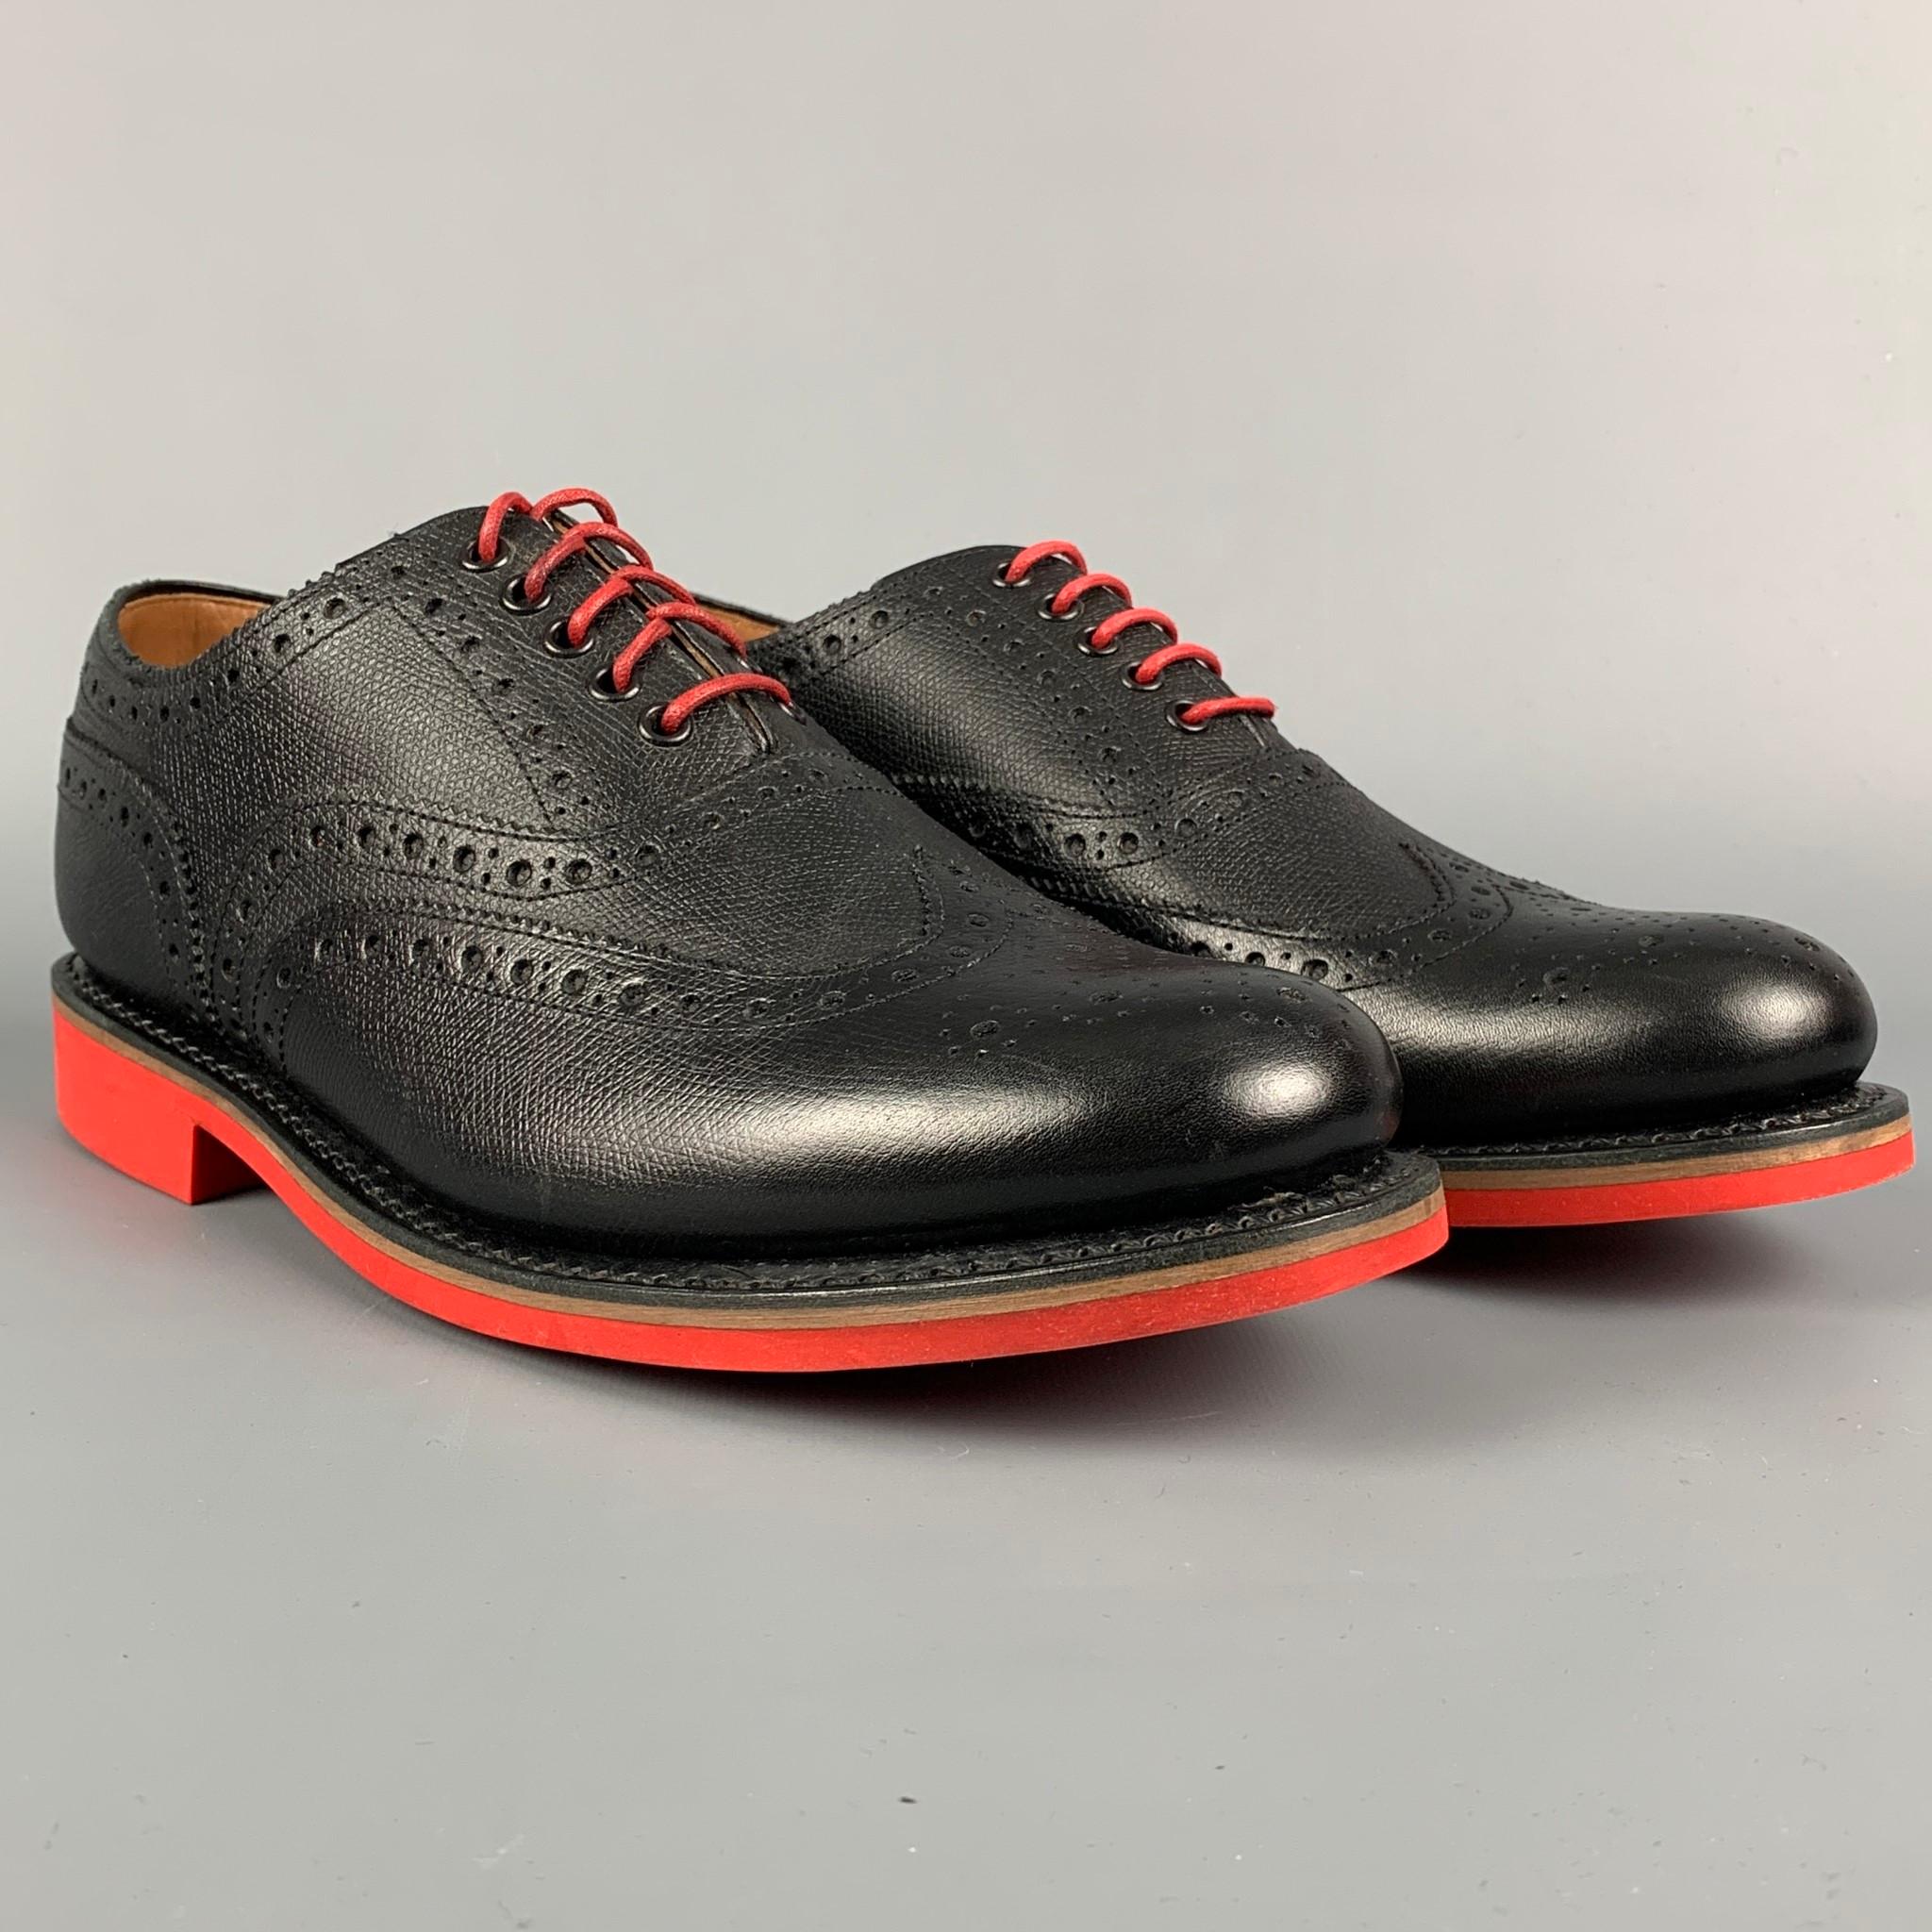 GRENSON shoes comes in a black perforated leather featuring a wingtip style, red rubber sole, and a lace up closure. Includes box. 

Excellent Pre-Owned Condition.
Marked: 5033 450RD 8.5 G

Outsole: 11.5 in. x 4 in. 